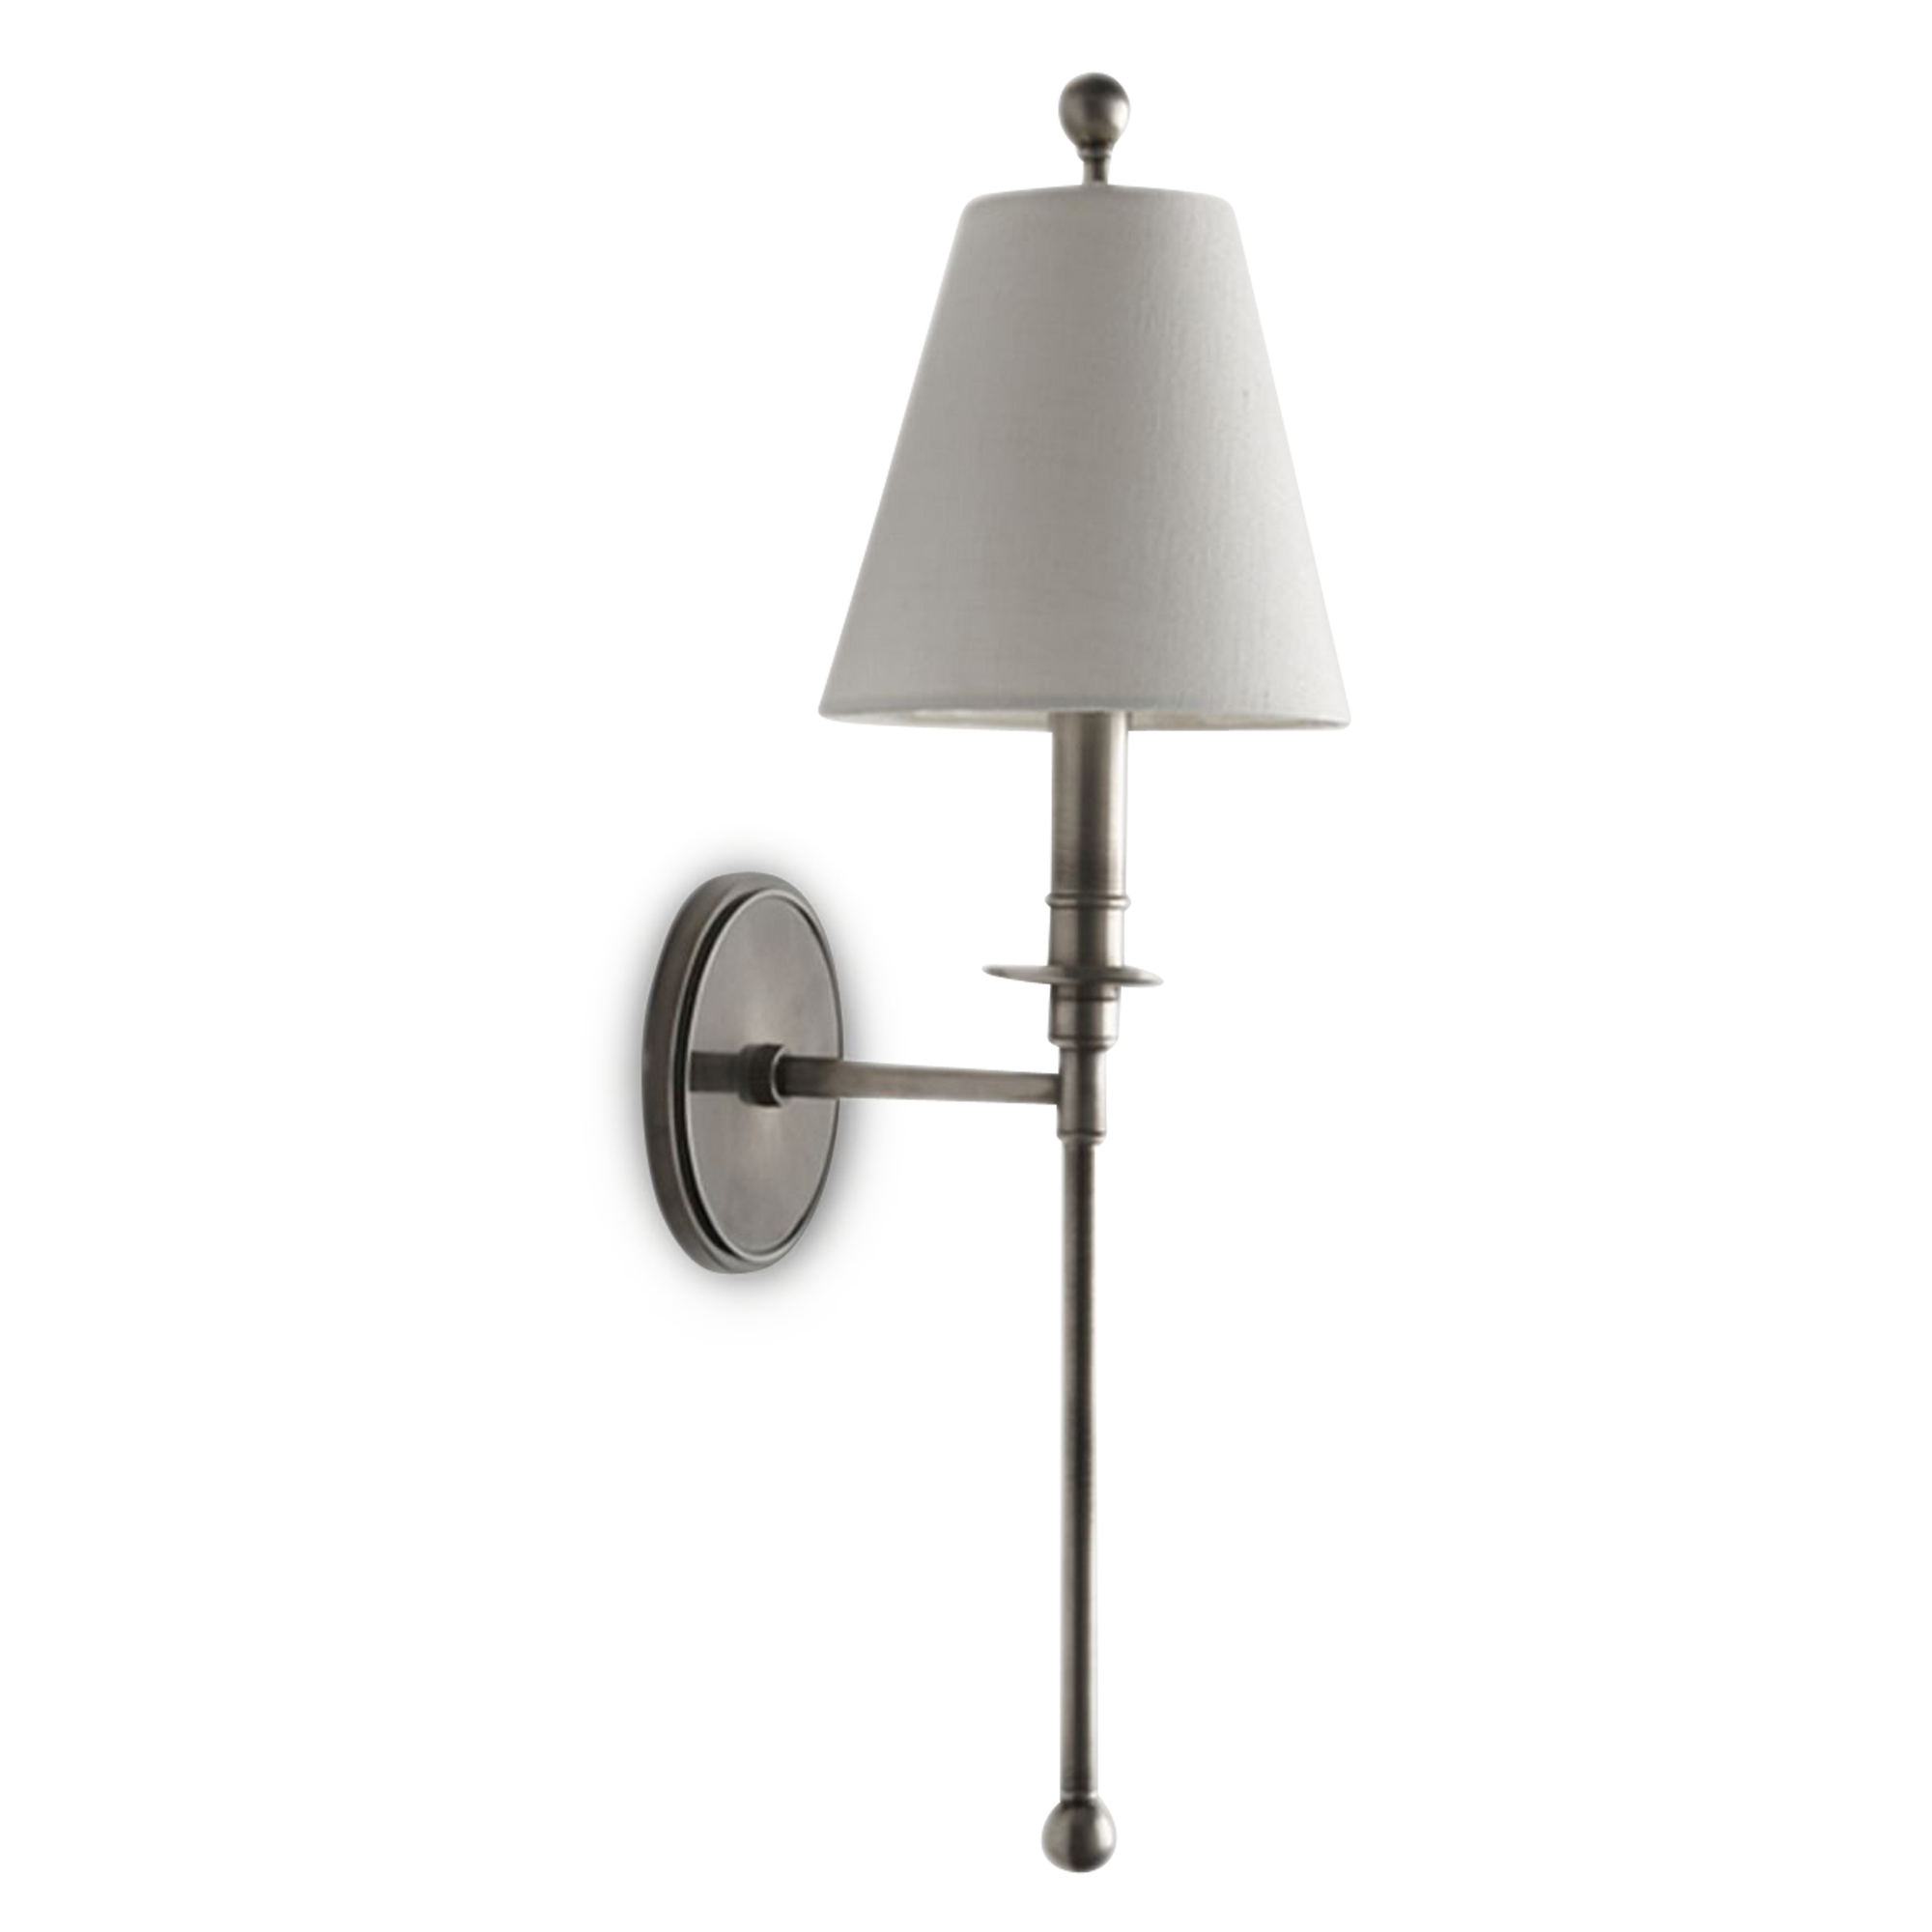 A modern sconce with a fabric shade and a long downward extension.